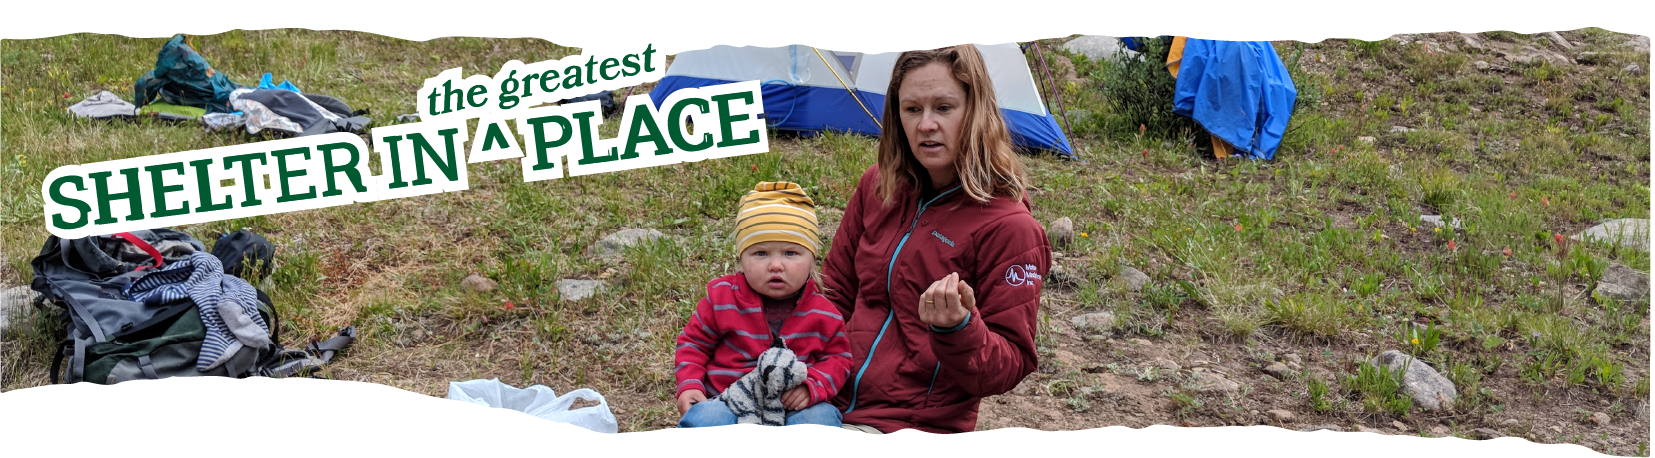 Title: Shelter in the Greatest Place laid over a photo of Rachel and one of her children on a backyard camping trip.